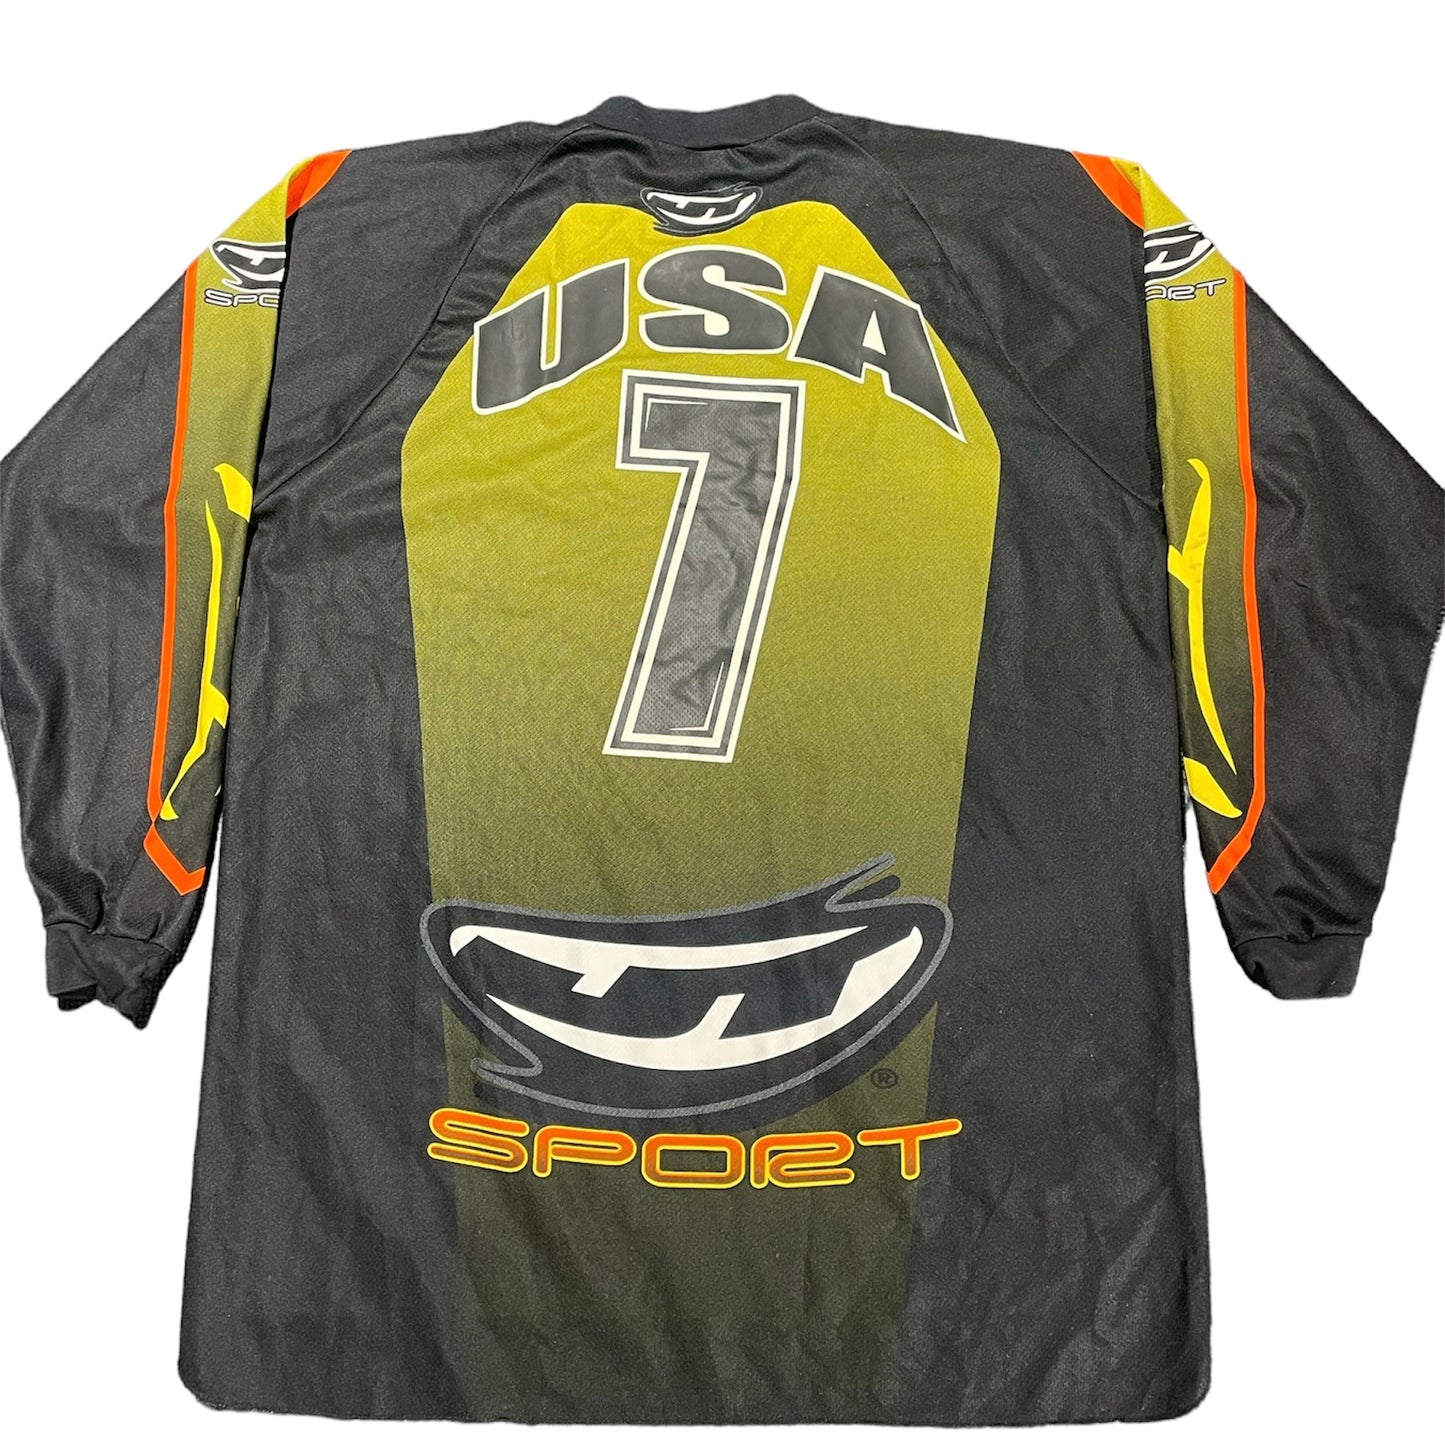 Steve Rabackoff USA Nations Cup Paintball team jersey